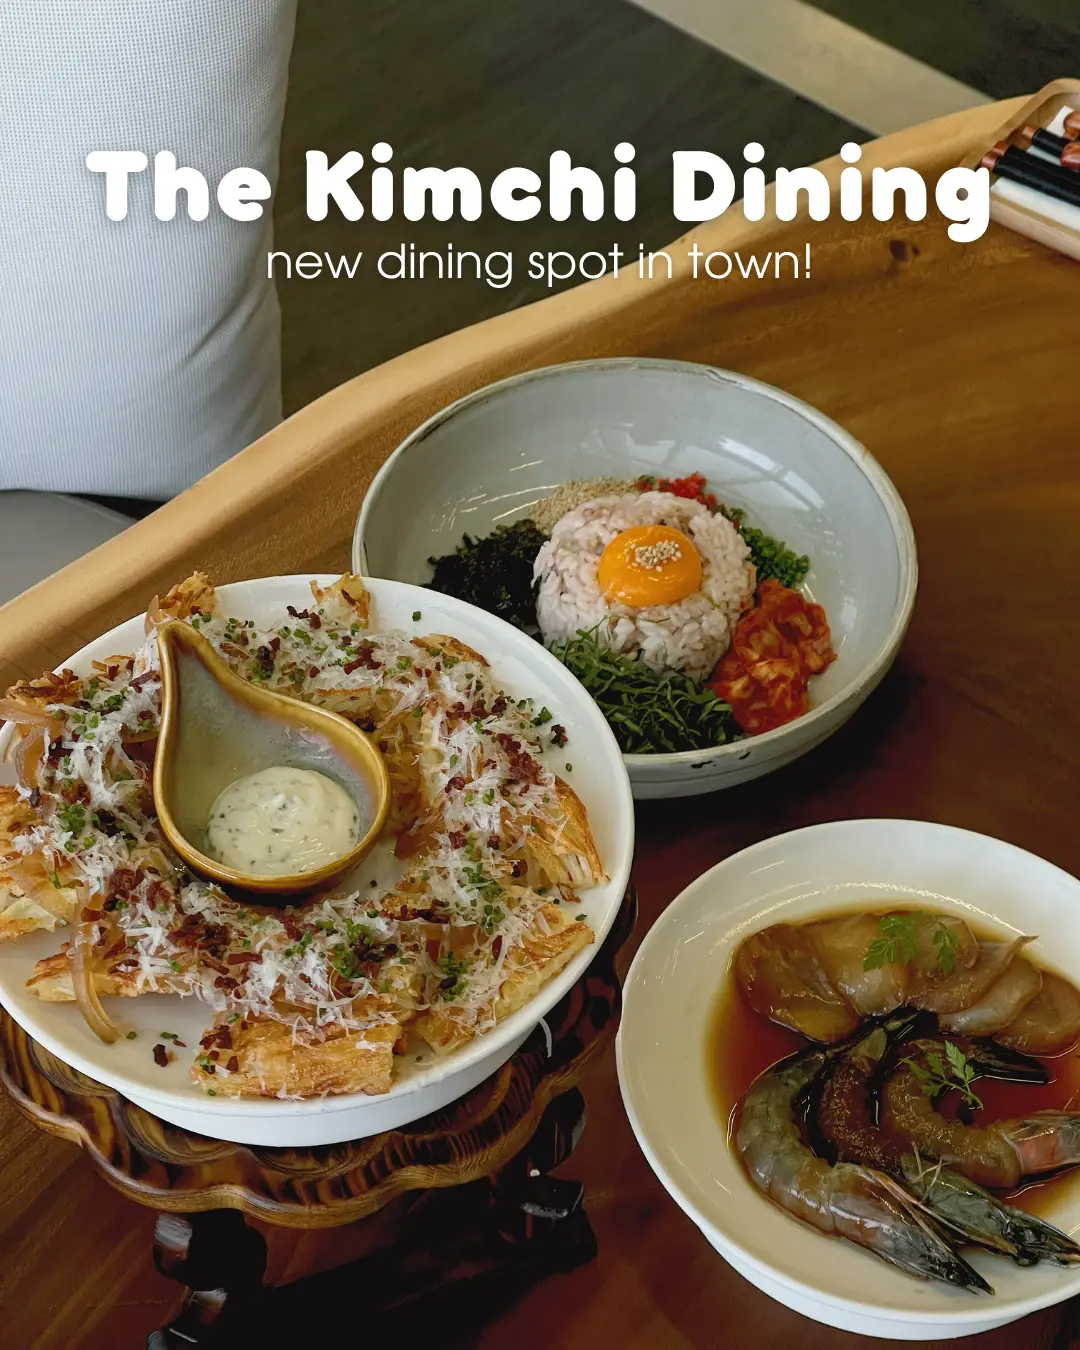 New dining spot in Town — The Kimchi Dining 🇰🇷's images